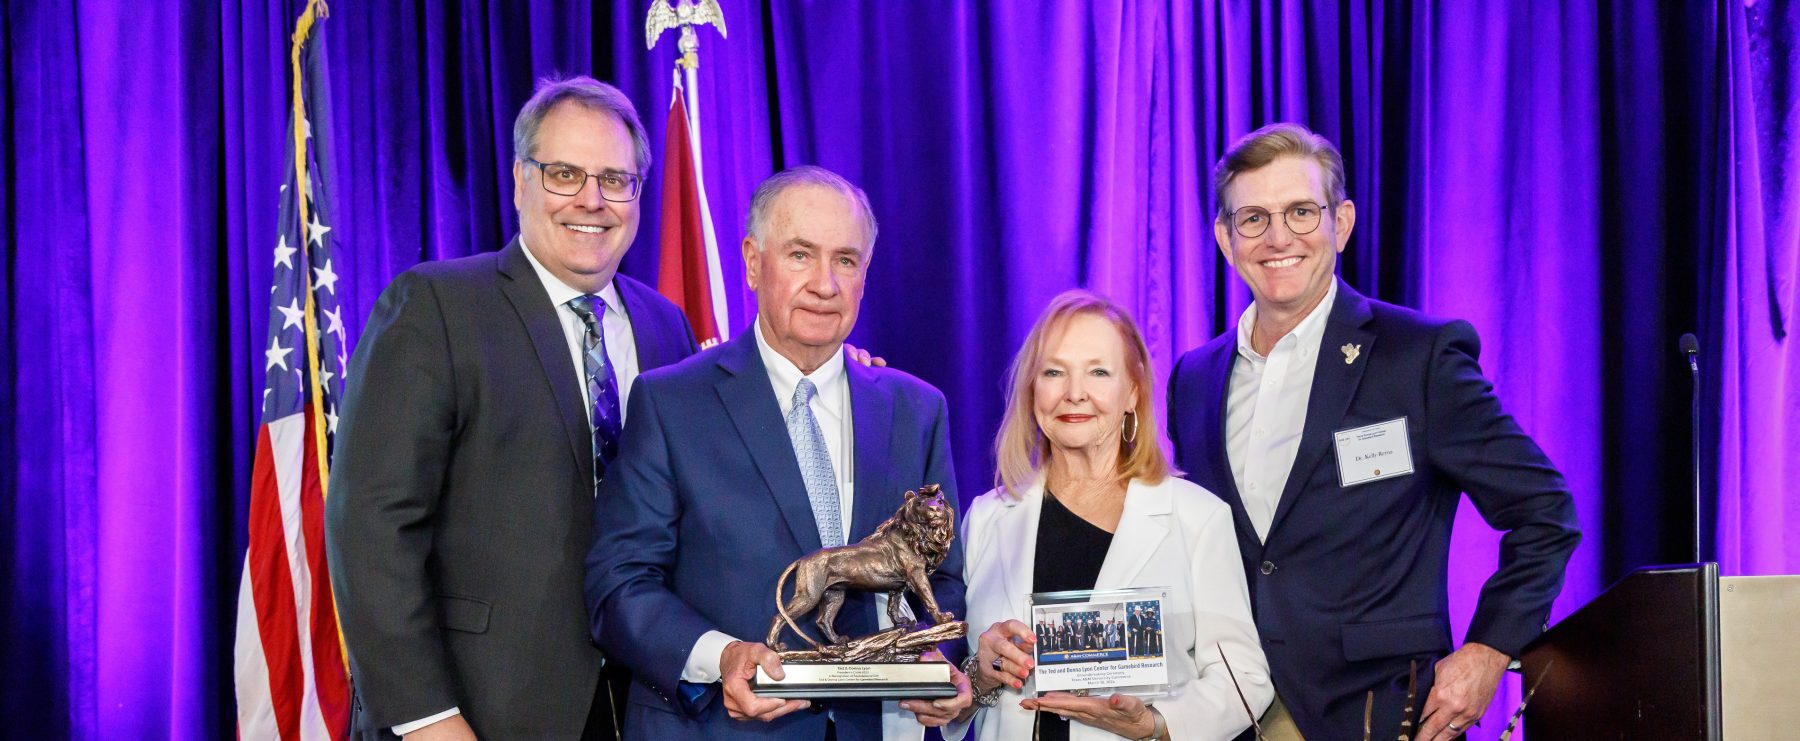 From left to right, Dr. Rudin, Senator Ted Lyon, Donna Lyon and Dr. Kelly Reyna stand on stage in front of a purple curtain and the U.S. and Texas flags. The Lyons are holding a lion statue. In front of the people, three bouquets of sunflowers sit on the floor.